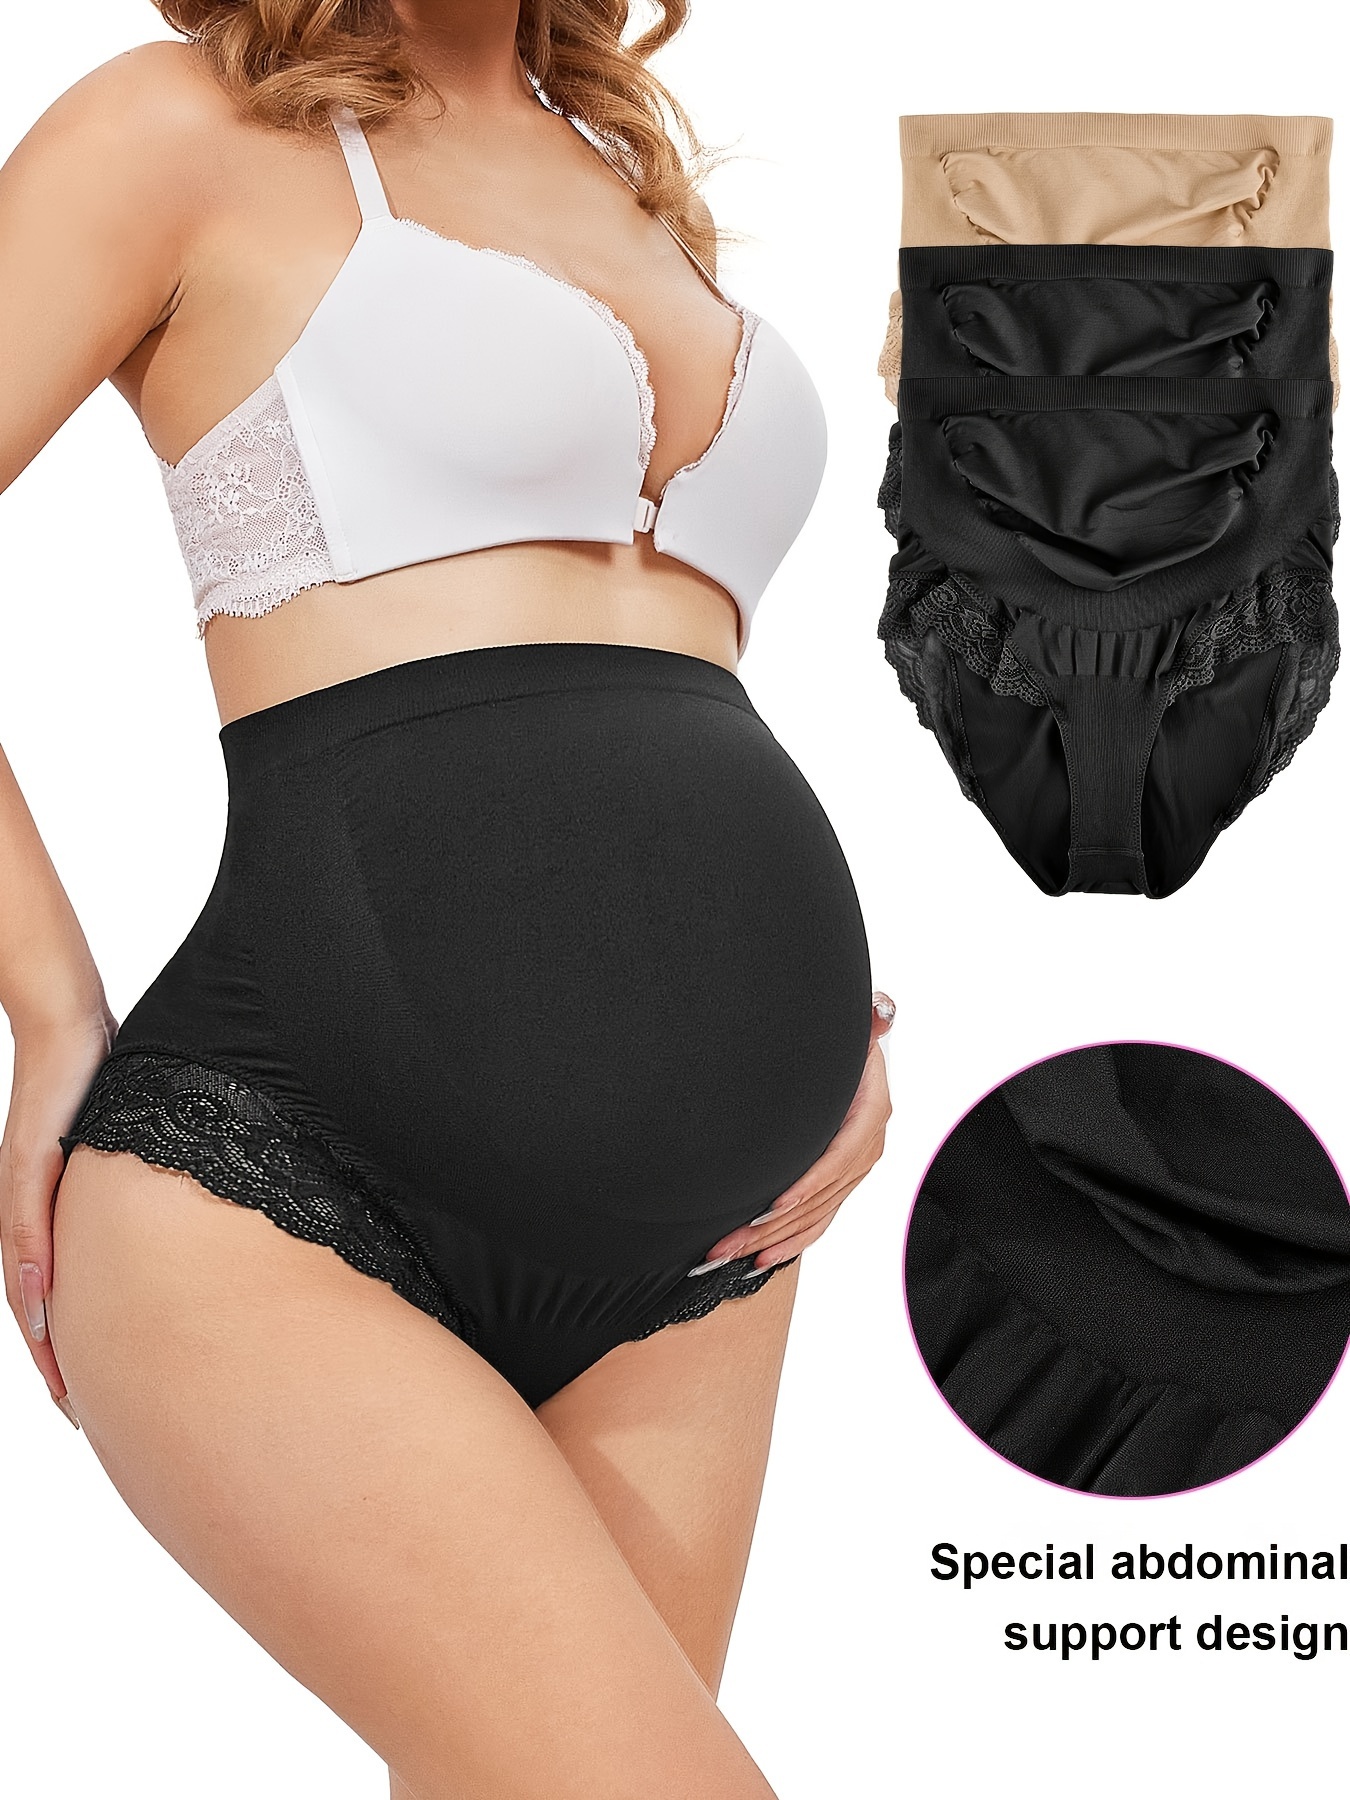 Flmtop Pregnancy Panties High Waist Adjustable Cotton Smile Face Belly Support  Maternity Briefs Underwear for Pregnant Women 